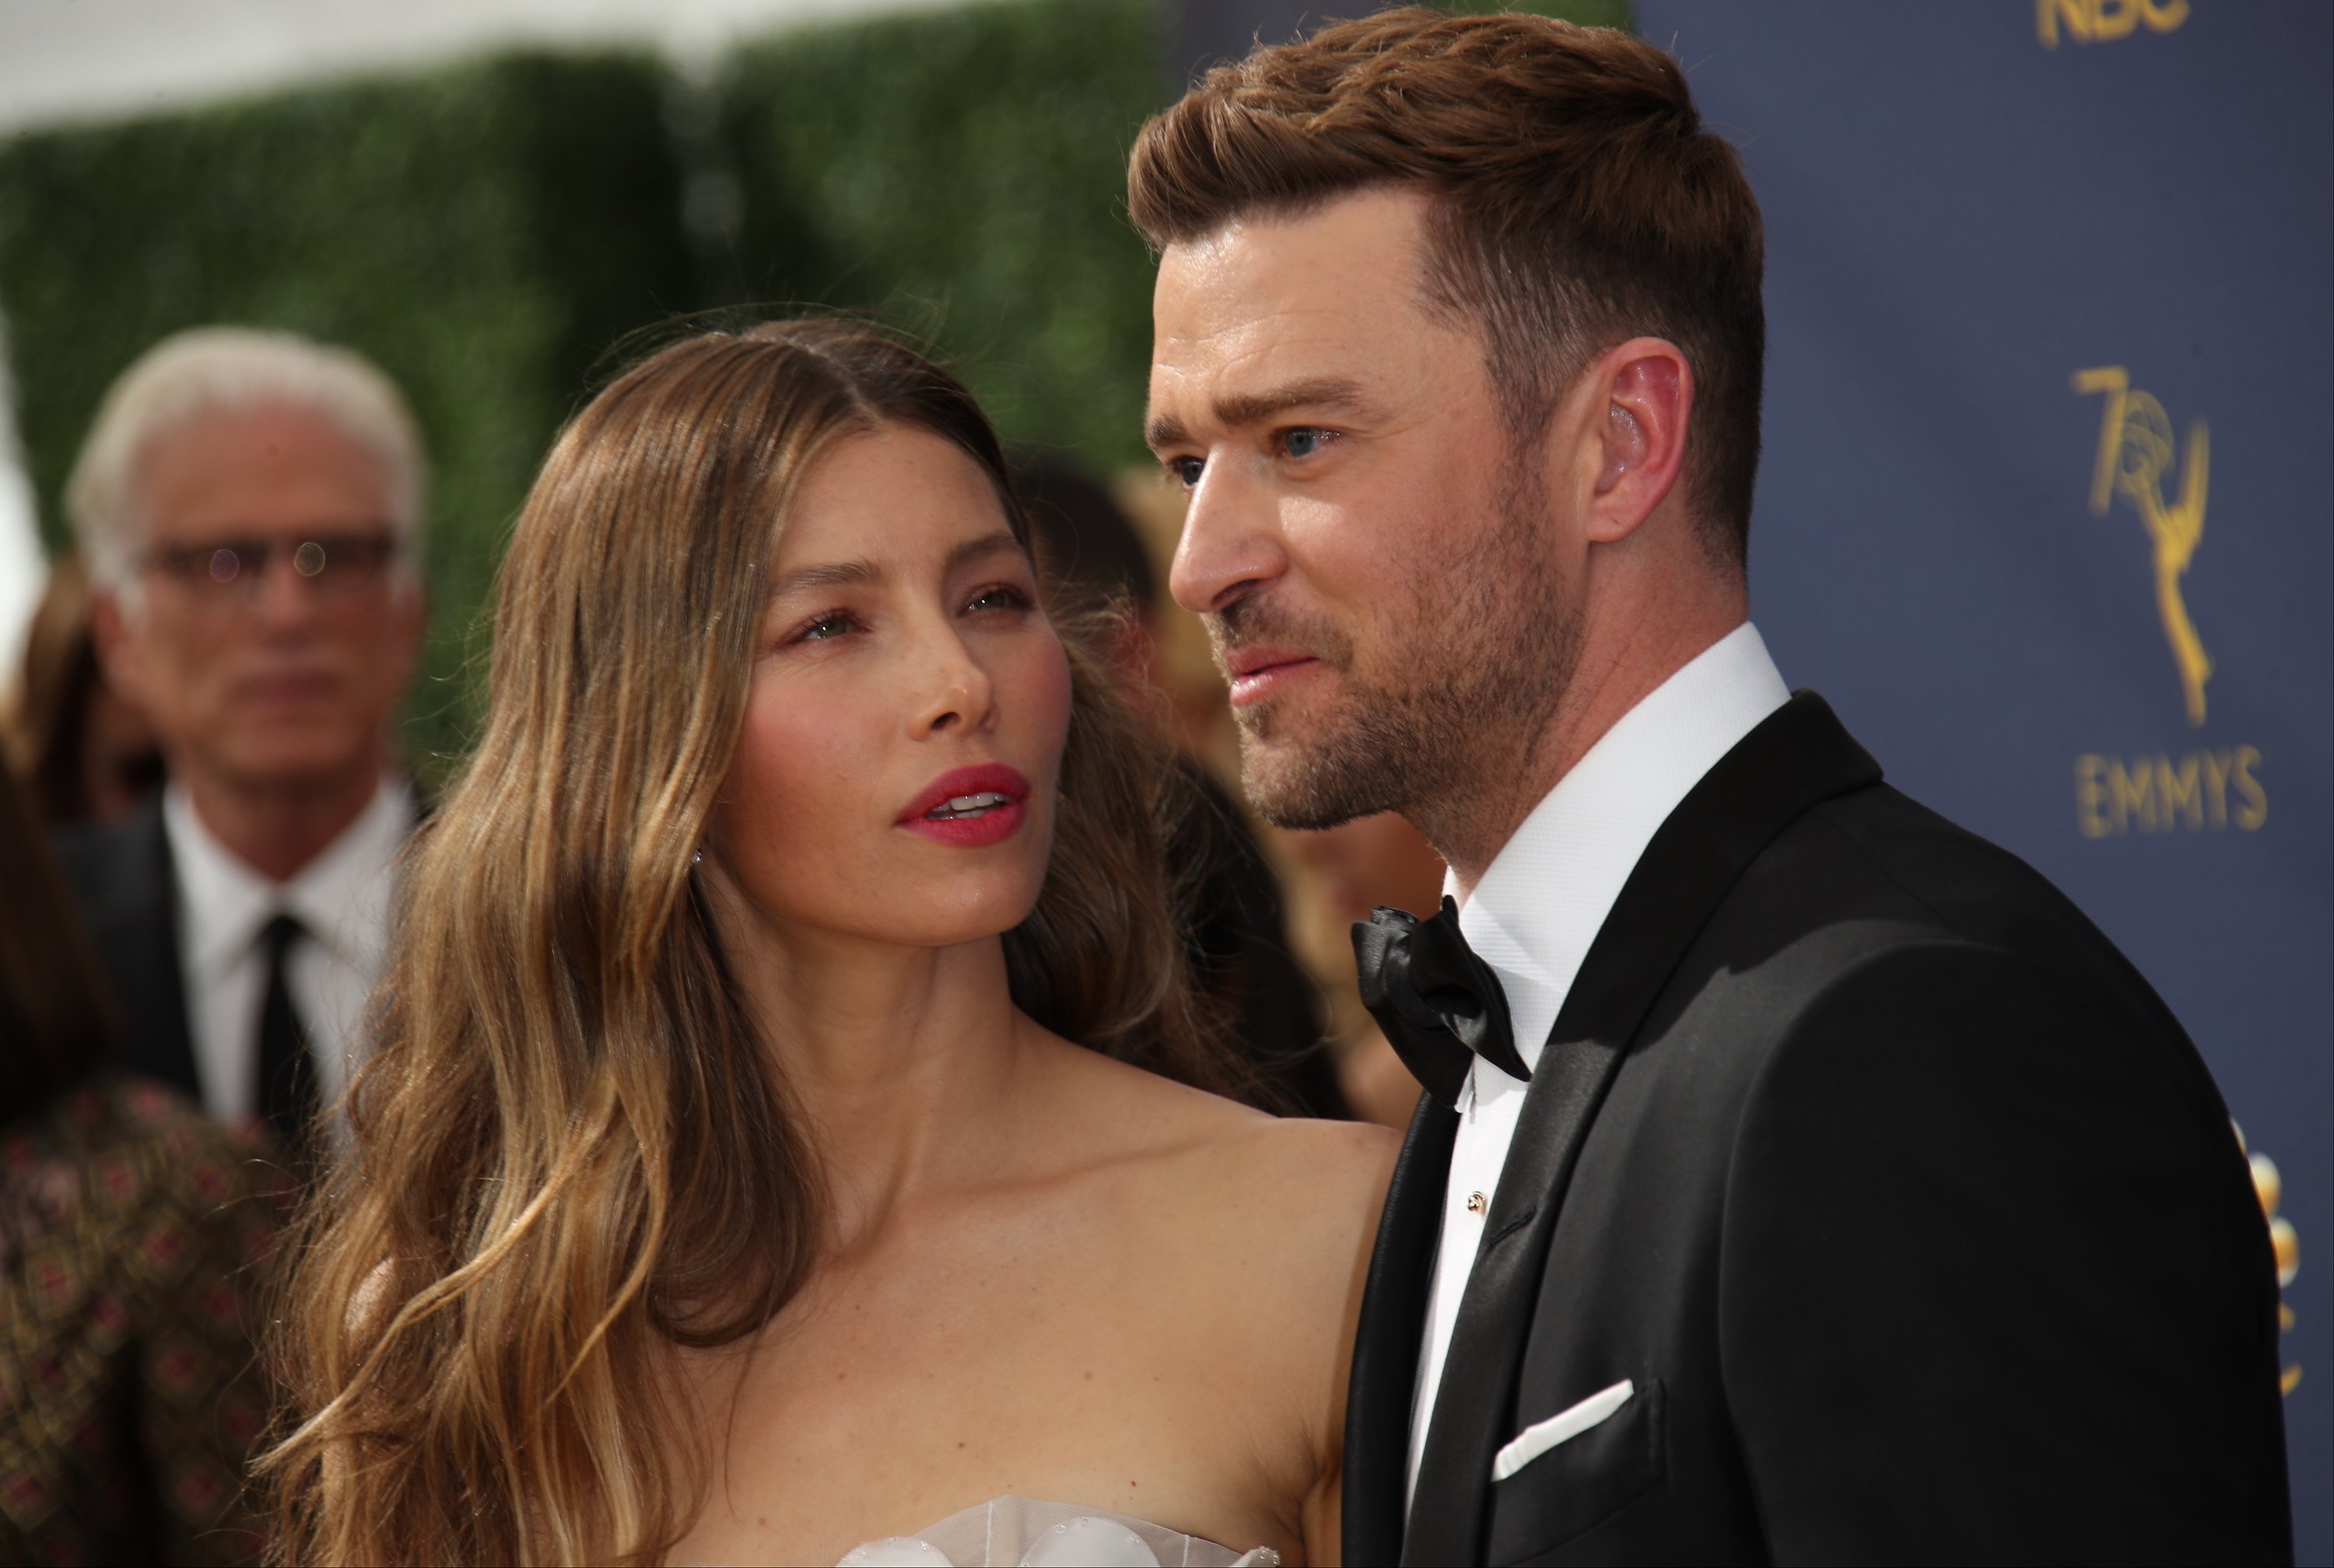 Jessica Biel and Justin Timberlake at the 70th Emmy Awards in 2018 in Los Angeles. | Source: Getty Images